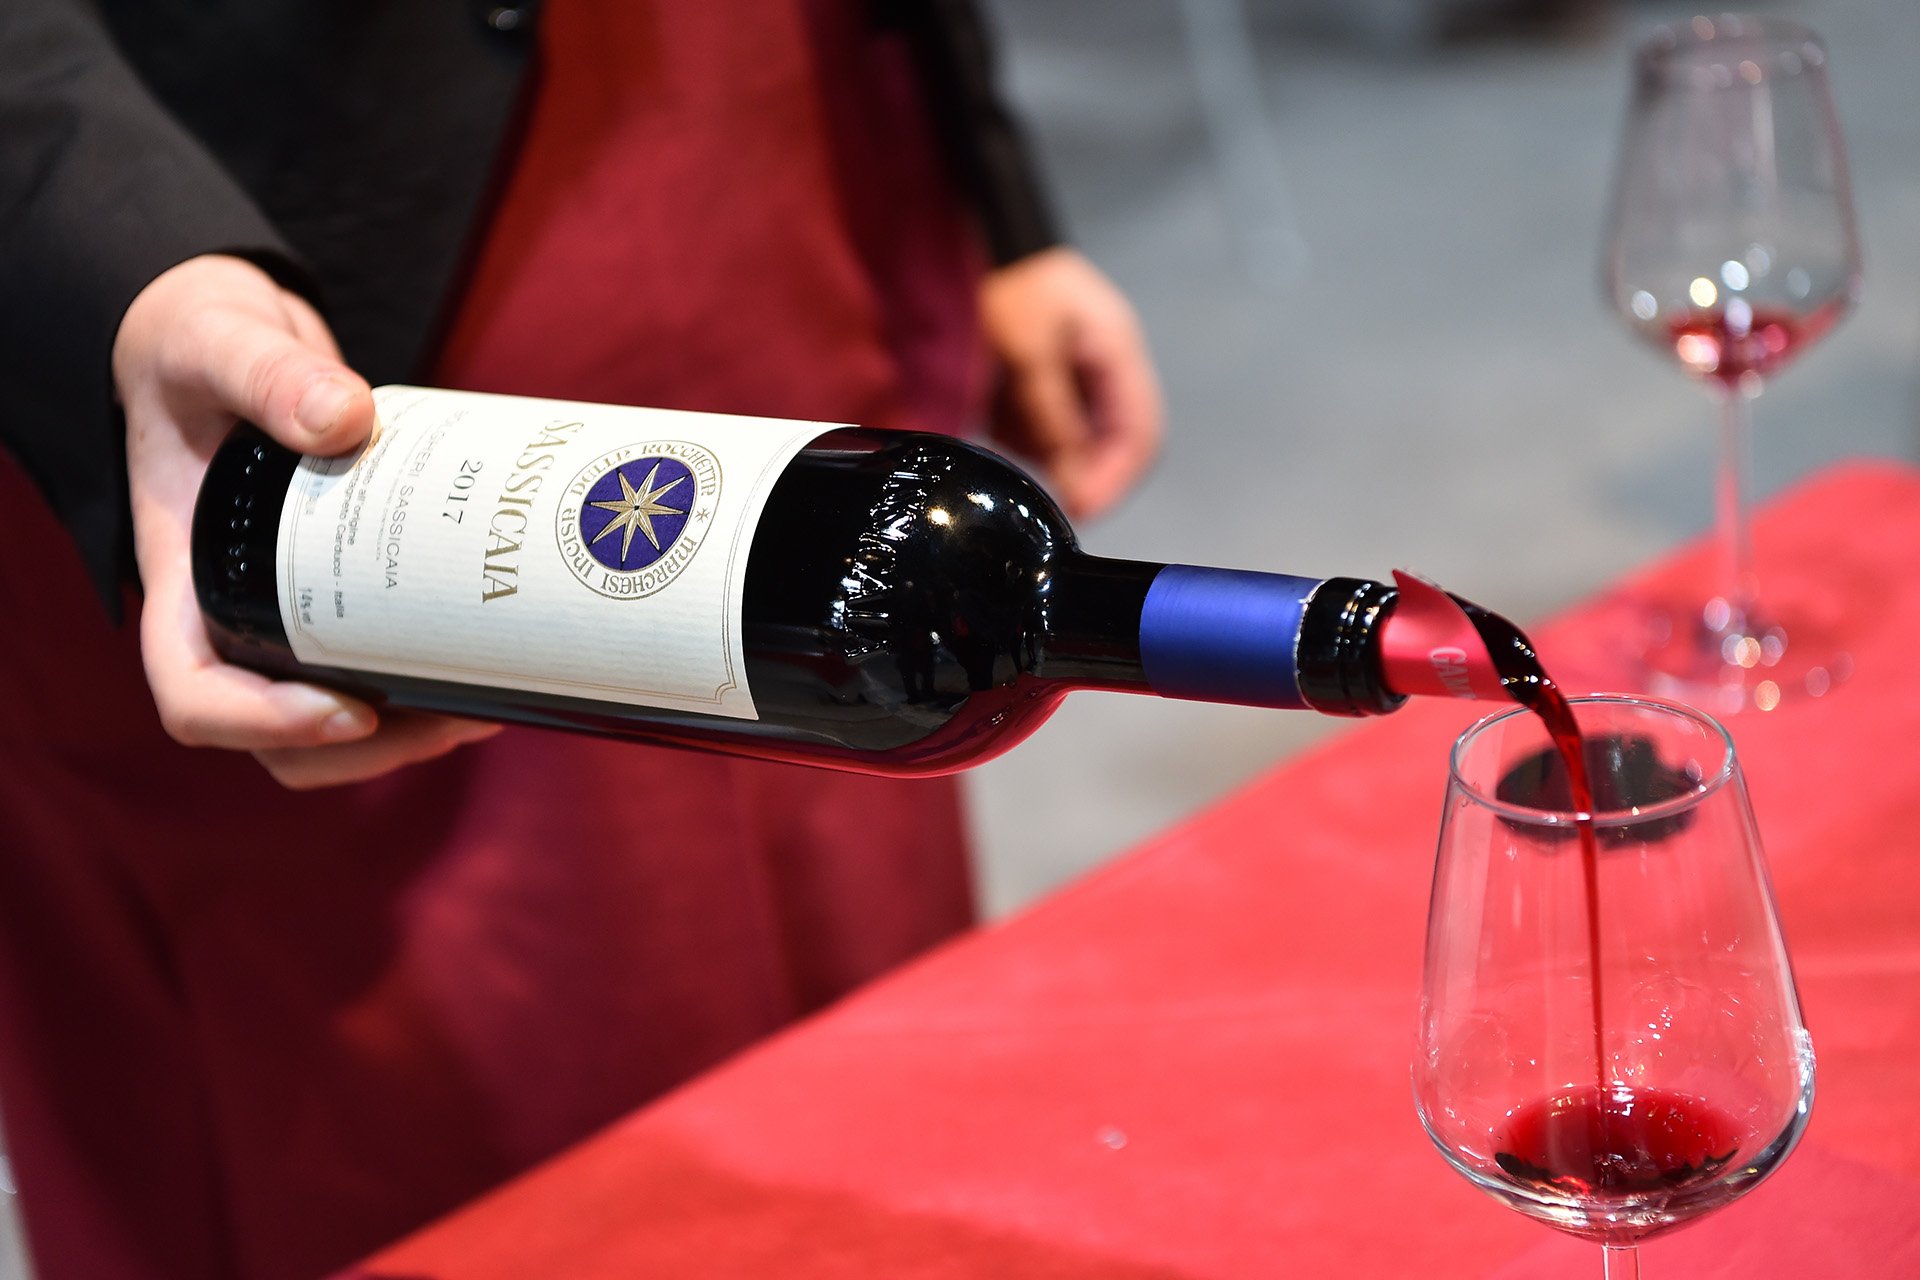 Sassicaia is the sixth most traded wine by volume.